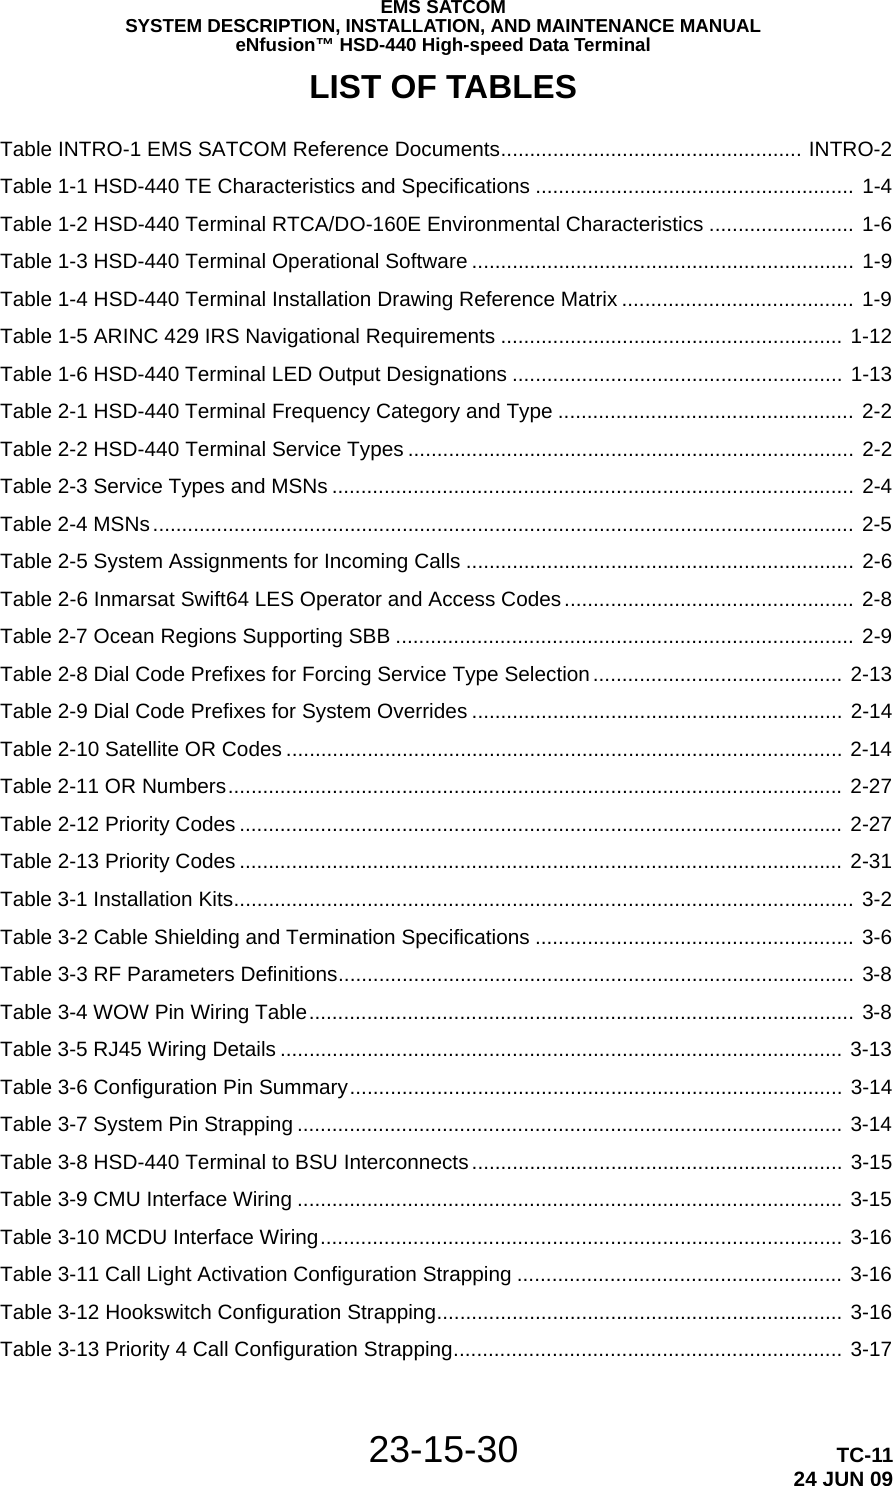 EMS SATCOMSYSTEM DESCRIPTION, INSTALLATION, AND MAINTENANCE MANUALeNfusion™ HSD-440 High-speed Data Terminal23-15-30 TC-1124 JUN 09LIST OF TABLES Table INTRO-1 EMS SATCOM Reference Documents.................................................... INTRO-2 Table 1-1 HSD-440 TE Characteristics and Specifications ....................................................... 1-4 Table 1-2 HSD-440 Terminal RTCA/DO-160E Environmental Characteristics ......................... 1-6 Table 1-3 HSD-440 Terminal Operational Software .................................................................. 1-9 Table 1-4 HSD-440 Terminal Installation Drawing Reference Matrix ........................................ 1-9 Table 1-5 ARINC 429 IRS Navigational Requirements ........................................................... 1-12 Table 1-6 HSD-440 Terminal LED Output Designations ......................................................... 1-13 Table 2-1 HSD-440 Terminal Frequency Category and Type ................................................... 2-2 Table 2-2 HSD-440 Terminal Service Types ............................................................................. 2-2 Table 2-3 Service Types and MSNs .......................................................................................... 2-4 Table 2-4 MSNs......................................................................................................................... 2-5 Table 2-5 System Assignments for Incoming Calls ................................................................... 2-6 Table 2-6 Inmarsat Swift64 LES Operator and Access Codes .................................................. 2-8 Table 2-7 Ocean Regions Supporting SBB ............................................................................... 2-9 Table 2-8 Dial Code Prefixes for Forcing Service Type Selection........................................... 2-13 Table 2-9 Dial Code Prefixes for System Overrides ................................................................ 2-14 Table 2-10 Satellite OR Codes ................................................................................................ 2-14 Table 2-11 OR Numbers.......................................................................................................... 2-27 Table 2-12 Priority Codes ........................................................................................................ 2-27 Table 2-13 Priority Codes ........................................................................................................ 2-31 Table 3-1 Installation Kits........................................................................................................... 3-2 Table 3-2 Cable Shielding and Termination Specifications ....................................................... 3-6 Table 3-3 RF Parameters Definitions......................................................................................... 3-8 Table 3-4 WOW Pin Wiring Table.............................................................................................. 3-8 Table 3-5 RJ45 Wiring Details ................................................................................................. 3-13 Table 3-6 Configuration Pin Summary..................................................................................... 3-14 Table 3-7 System Pin Strapping .............................................................................................. 3-14 Table 3-8 HSD-440 Terminal to BSU Interconnects ................................................................ 3-15 Table 3-9 CMU Interface Wiring .............................................................................................. 3-15 Table 3-10 MCDU Interface Wiring.......................................................................................... 3-16 Table 3-11 Call Light Activation Configuration Strapping ........................................................ 3-16 Table 3-12 Hookswitch Configuration Strapping...................................................................... 3-16 Table 3-13 Priority 4 Call Configuration Strapping................................................................... 3-17